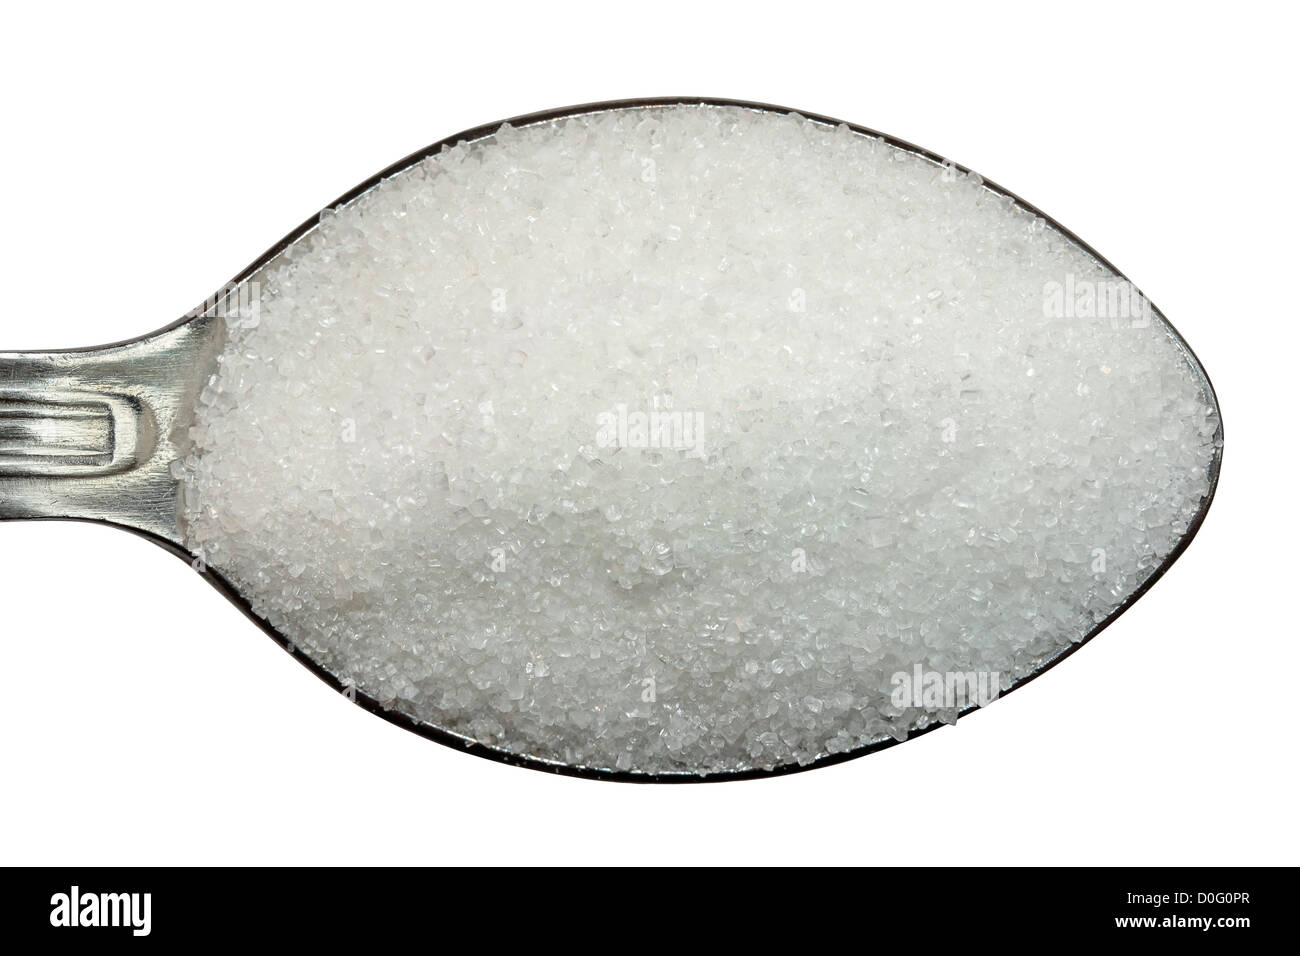 https://c8.alamy.com/comp/D0G0PR/teaspoon-of-sugar-isolated-on-white-background-viewed-from-above-D0G0PR.jpg